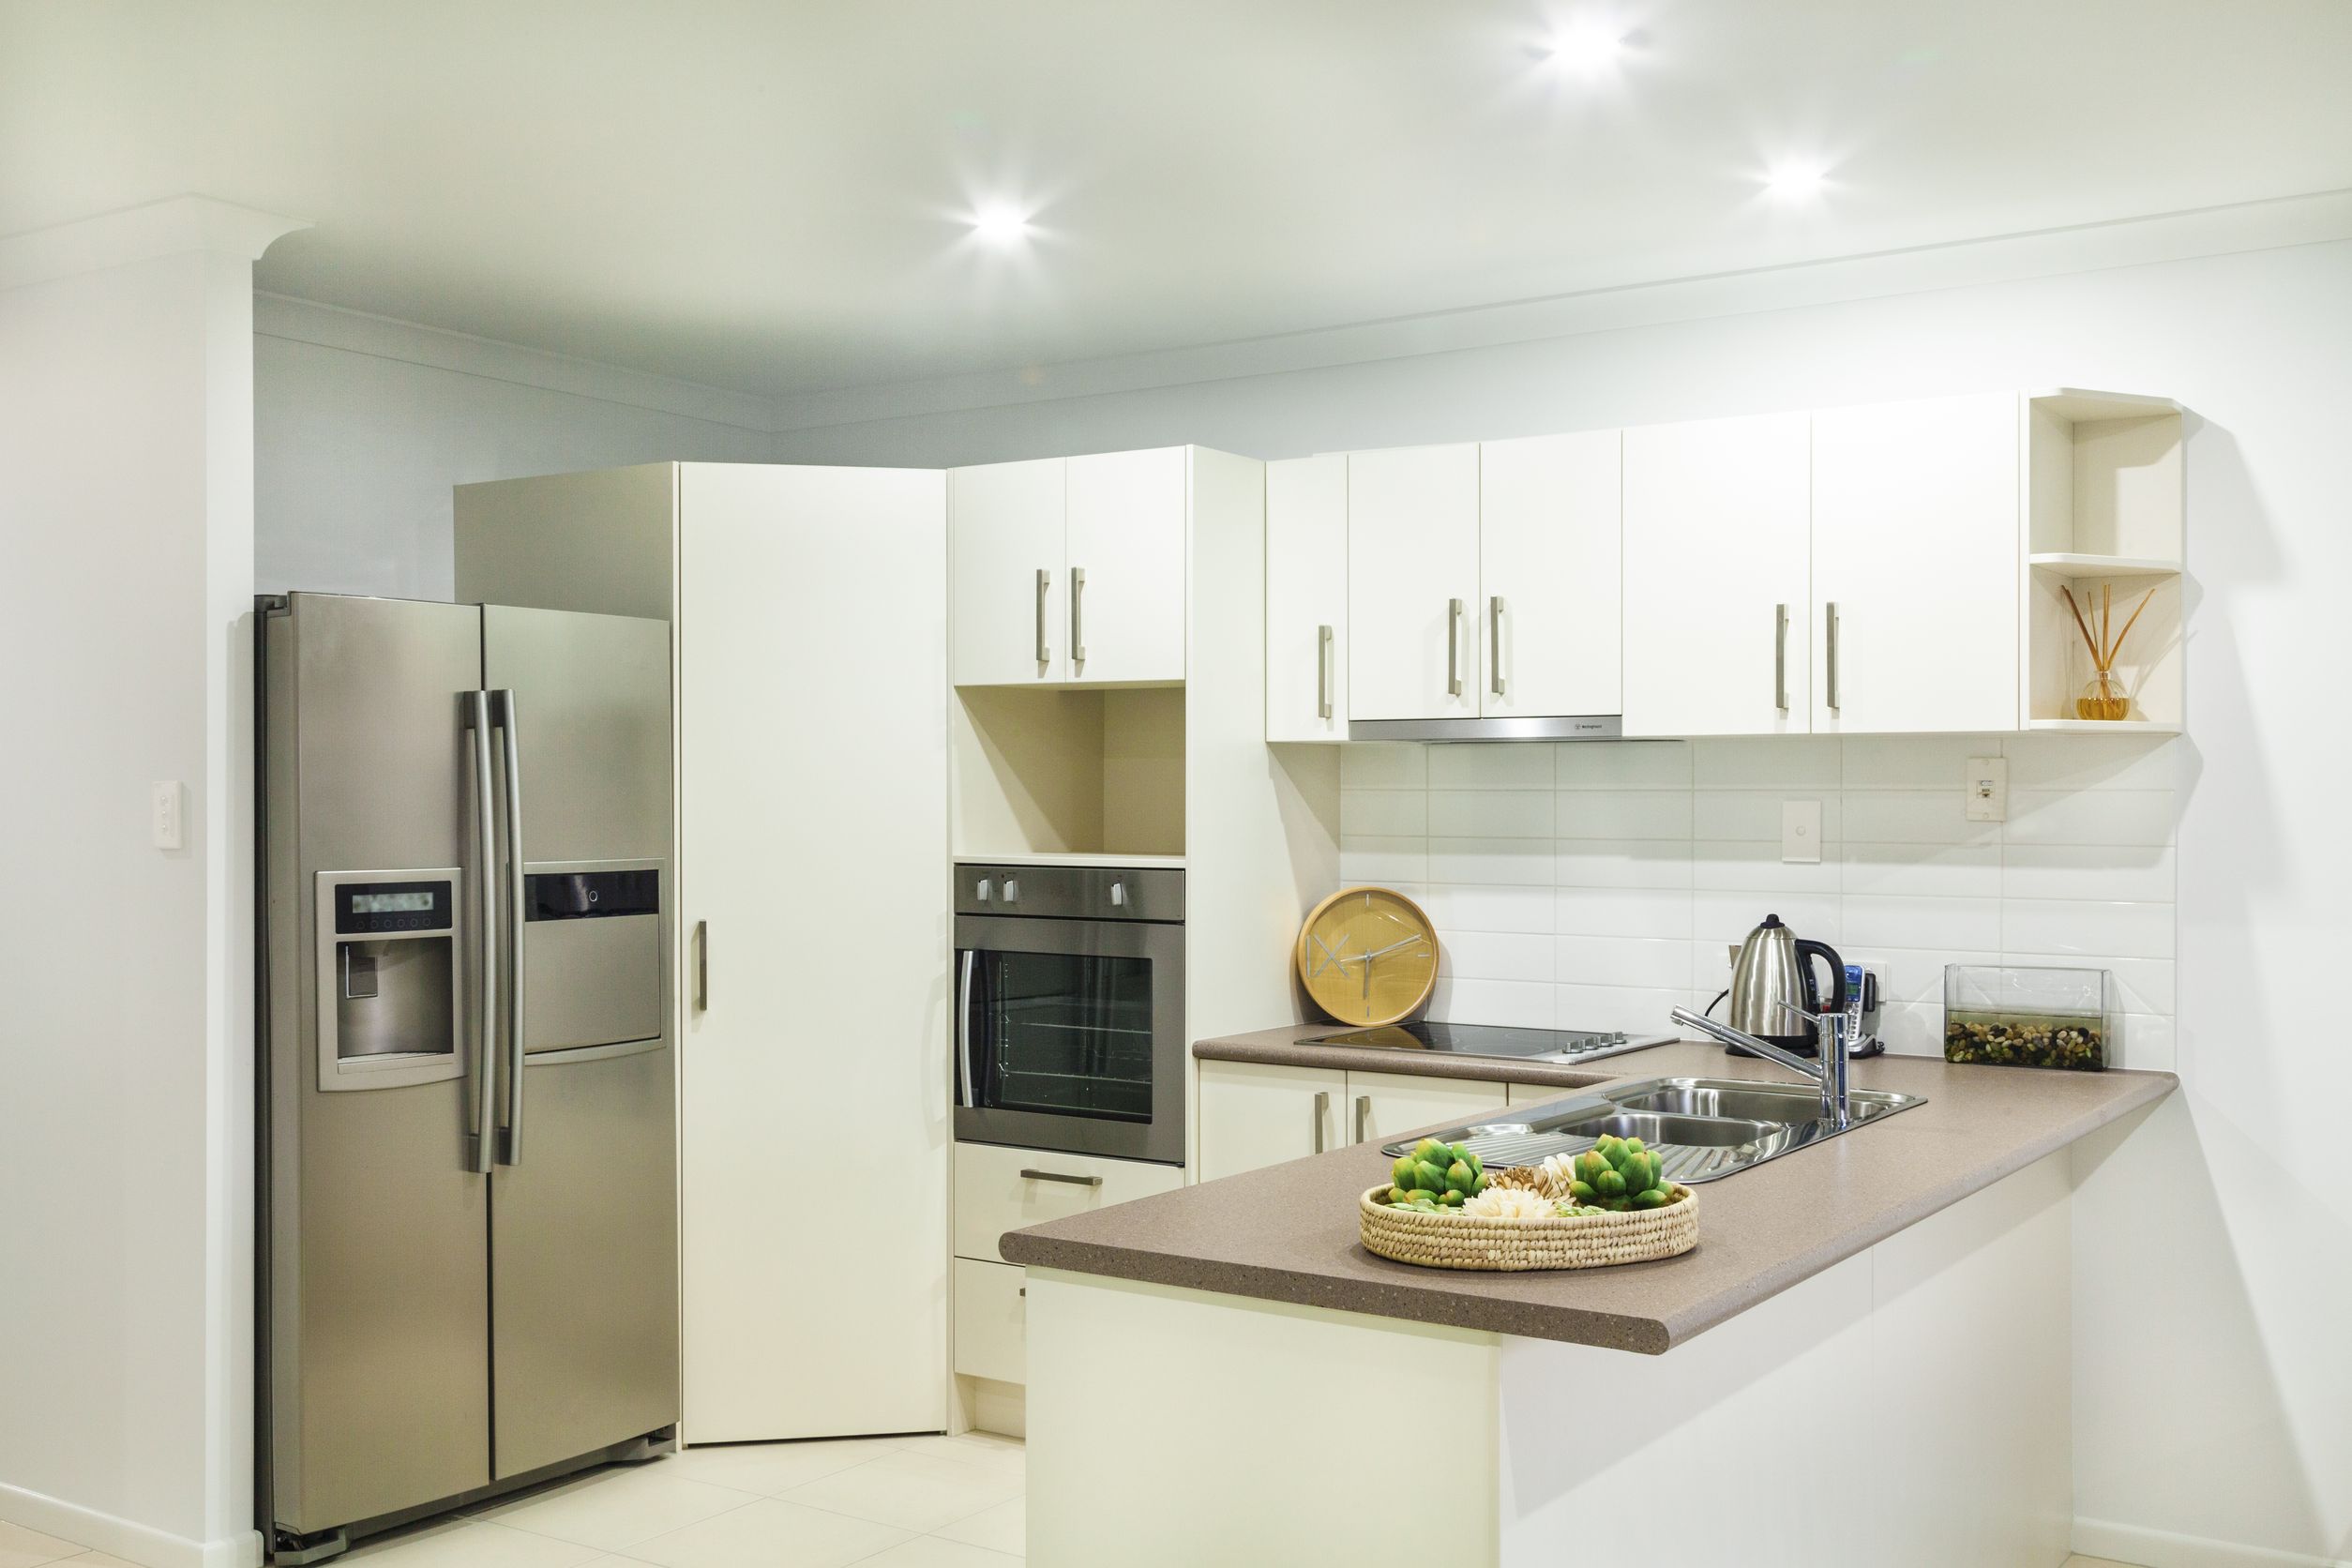 Does Your Home Need a Kitchen Renovation in Tucson, AZ?